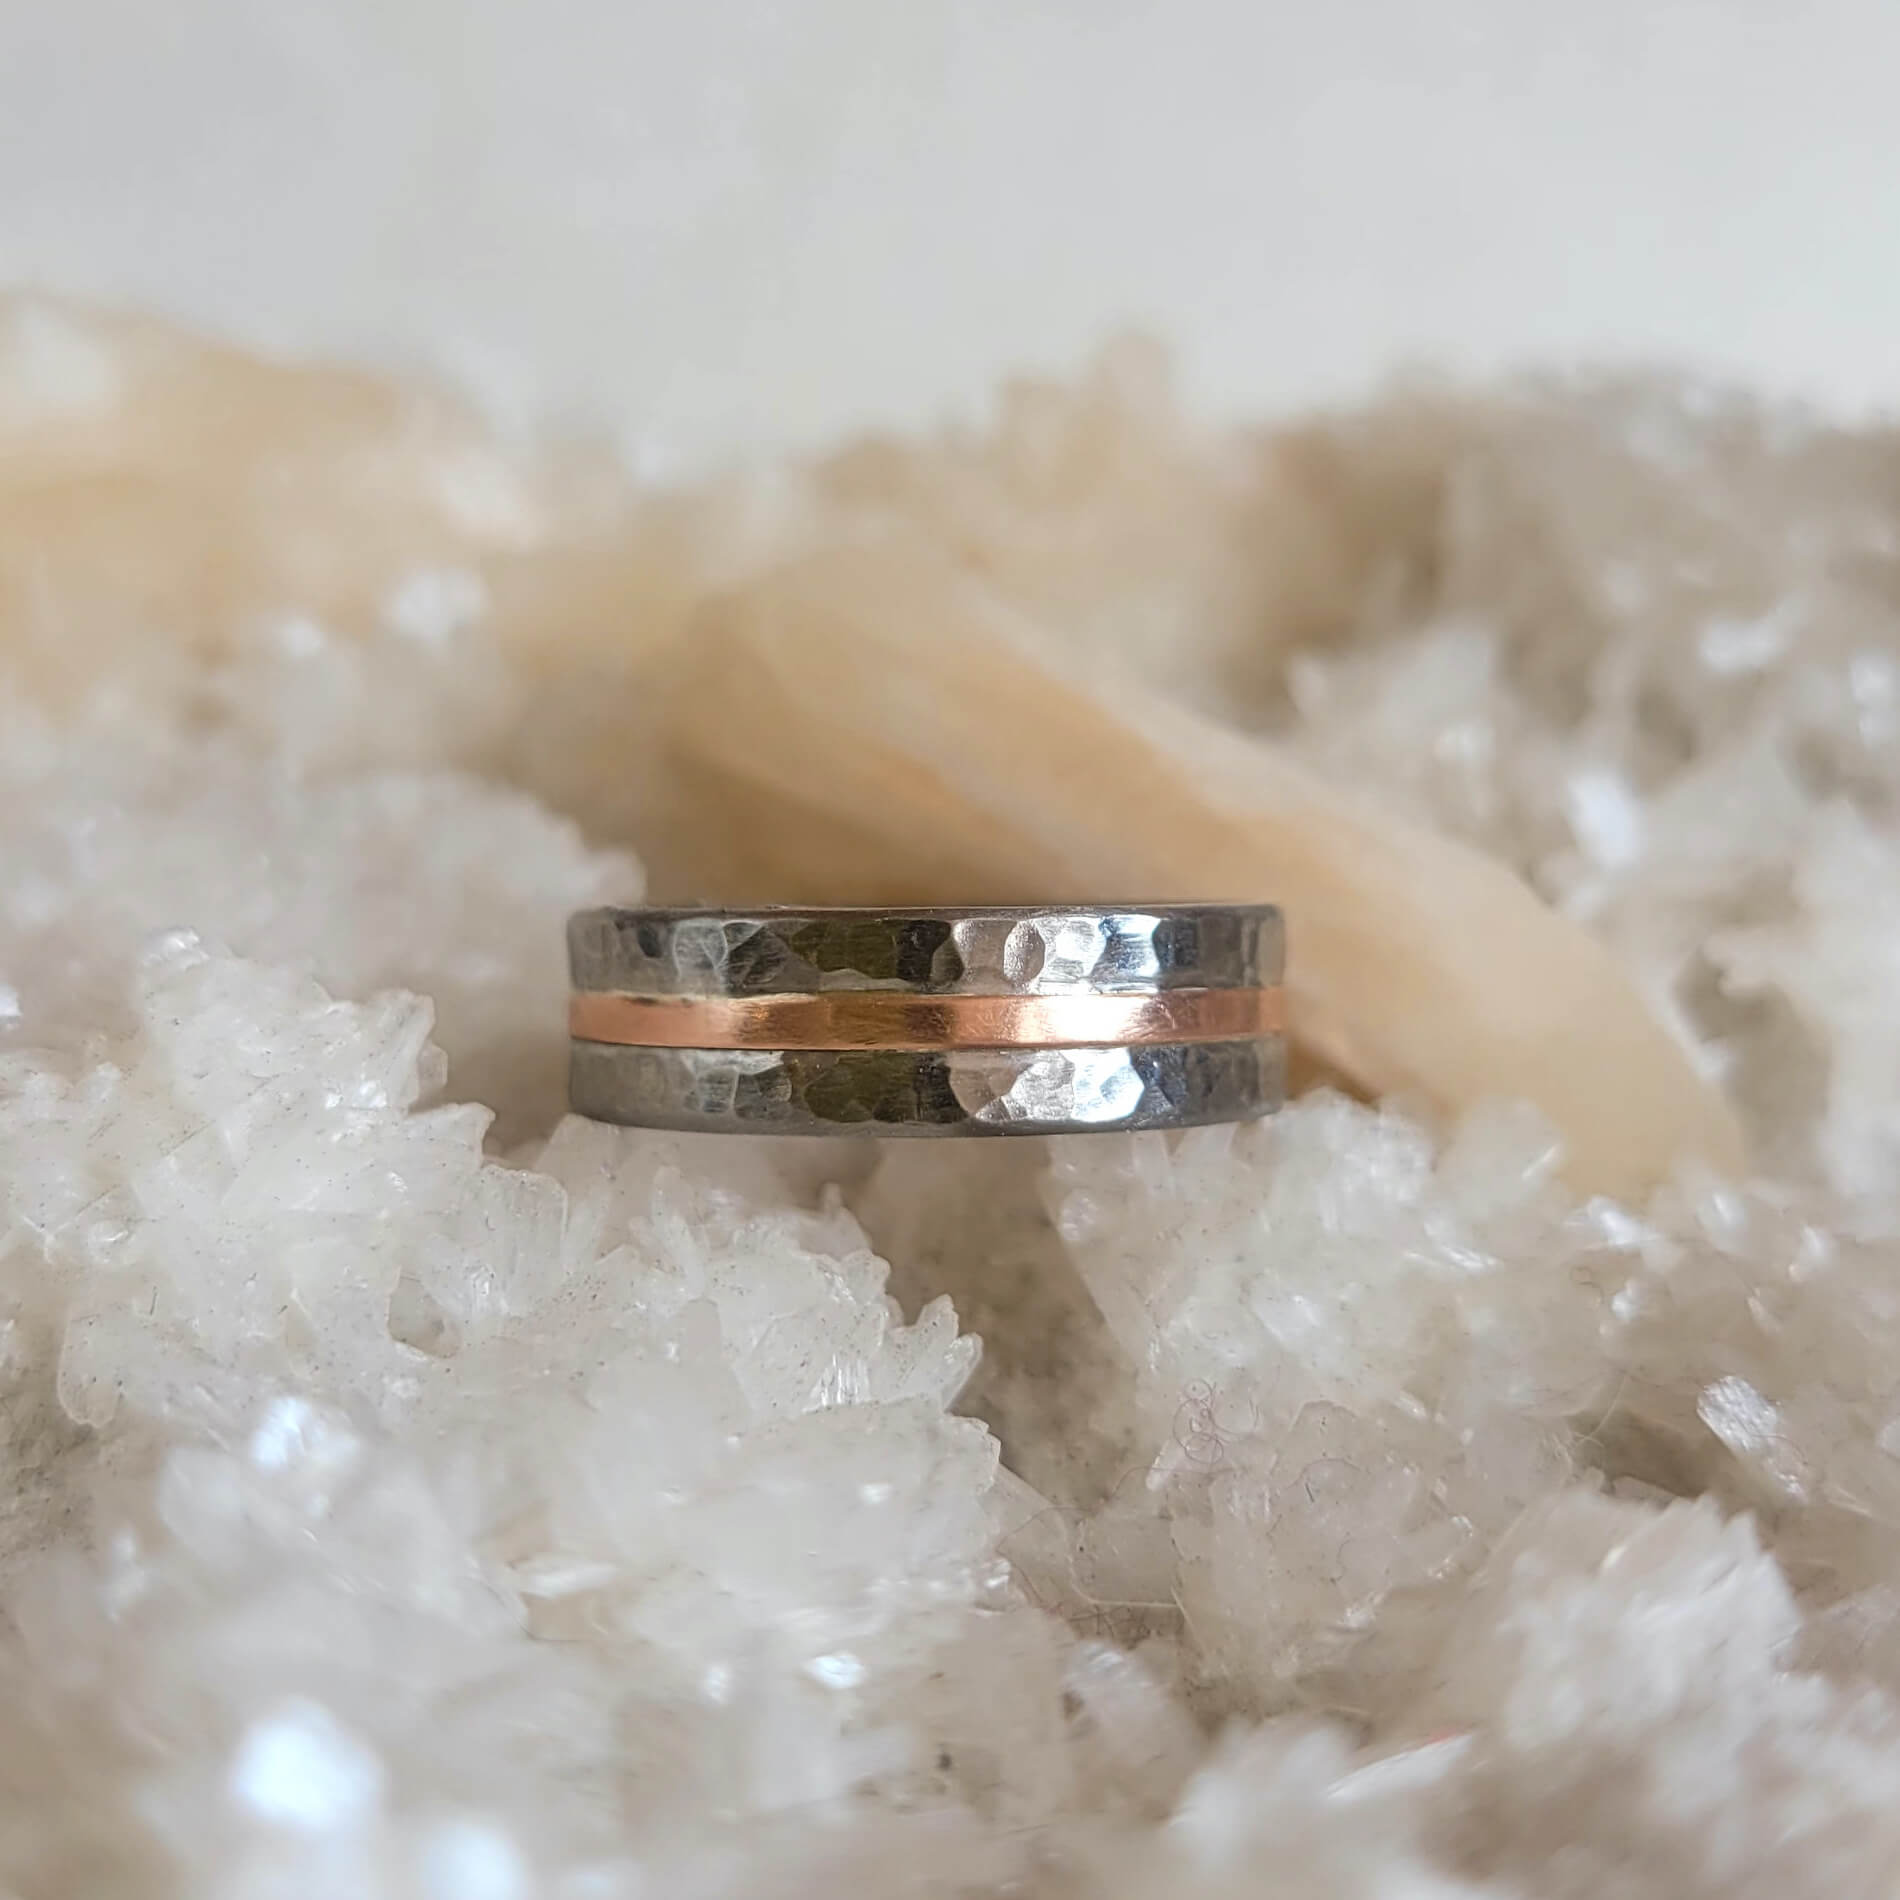 Hand hammered palladium and rose gold wedding band made by EC Design Jewelry in Minneapolis, MN.